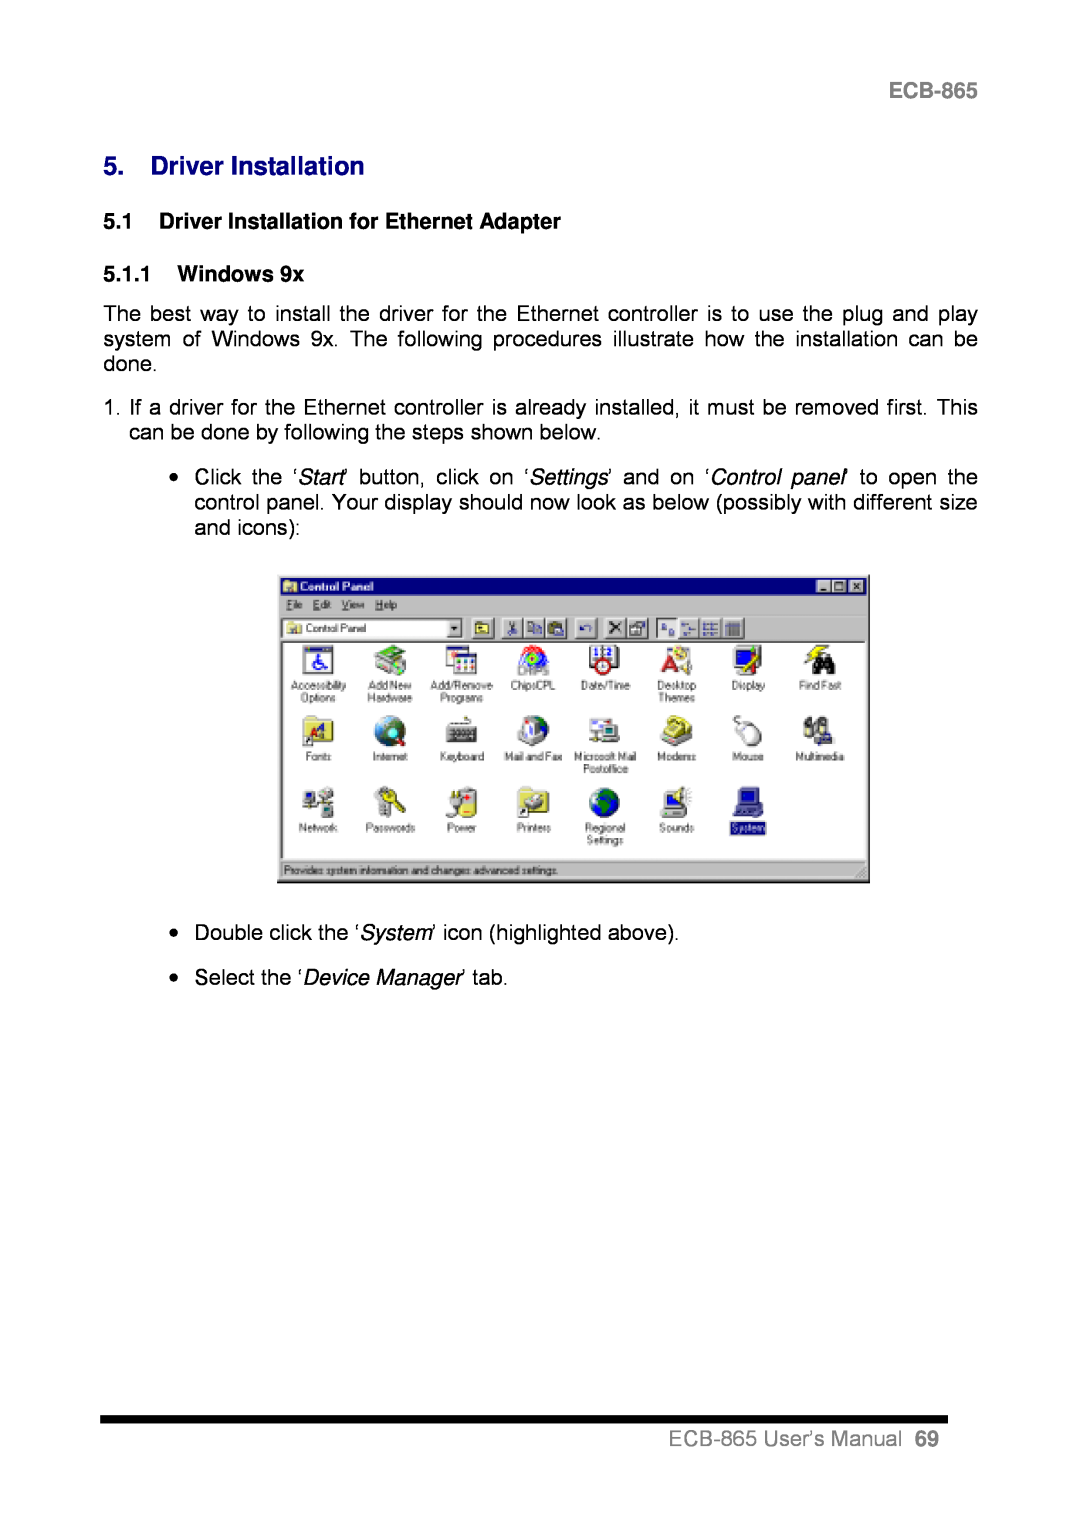 Intel user manual 5.1Driver Installation for Ethernet Adapter, 5.1.1Windows, ECB-865User’s Manual 